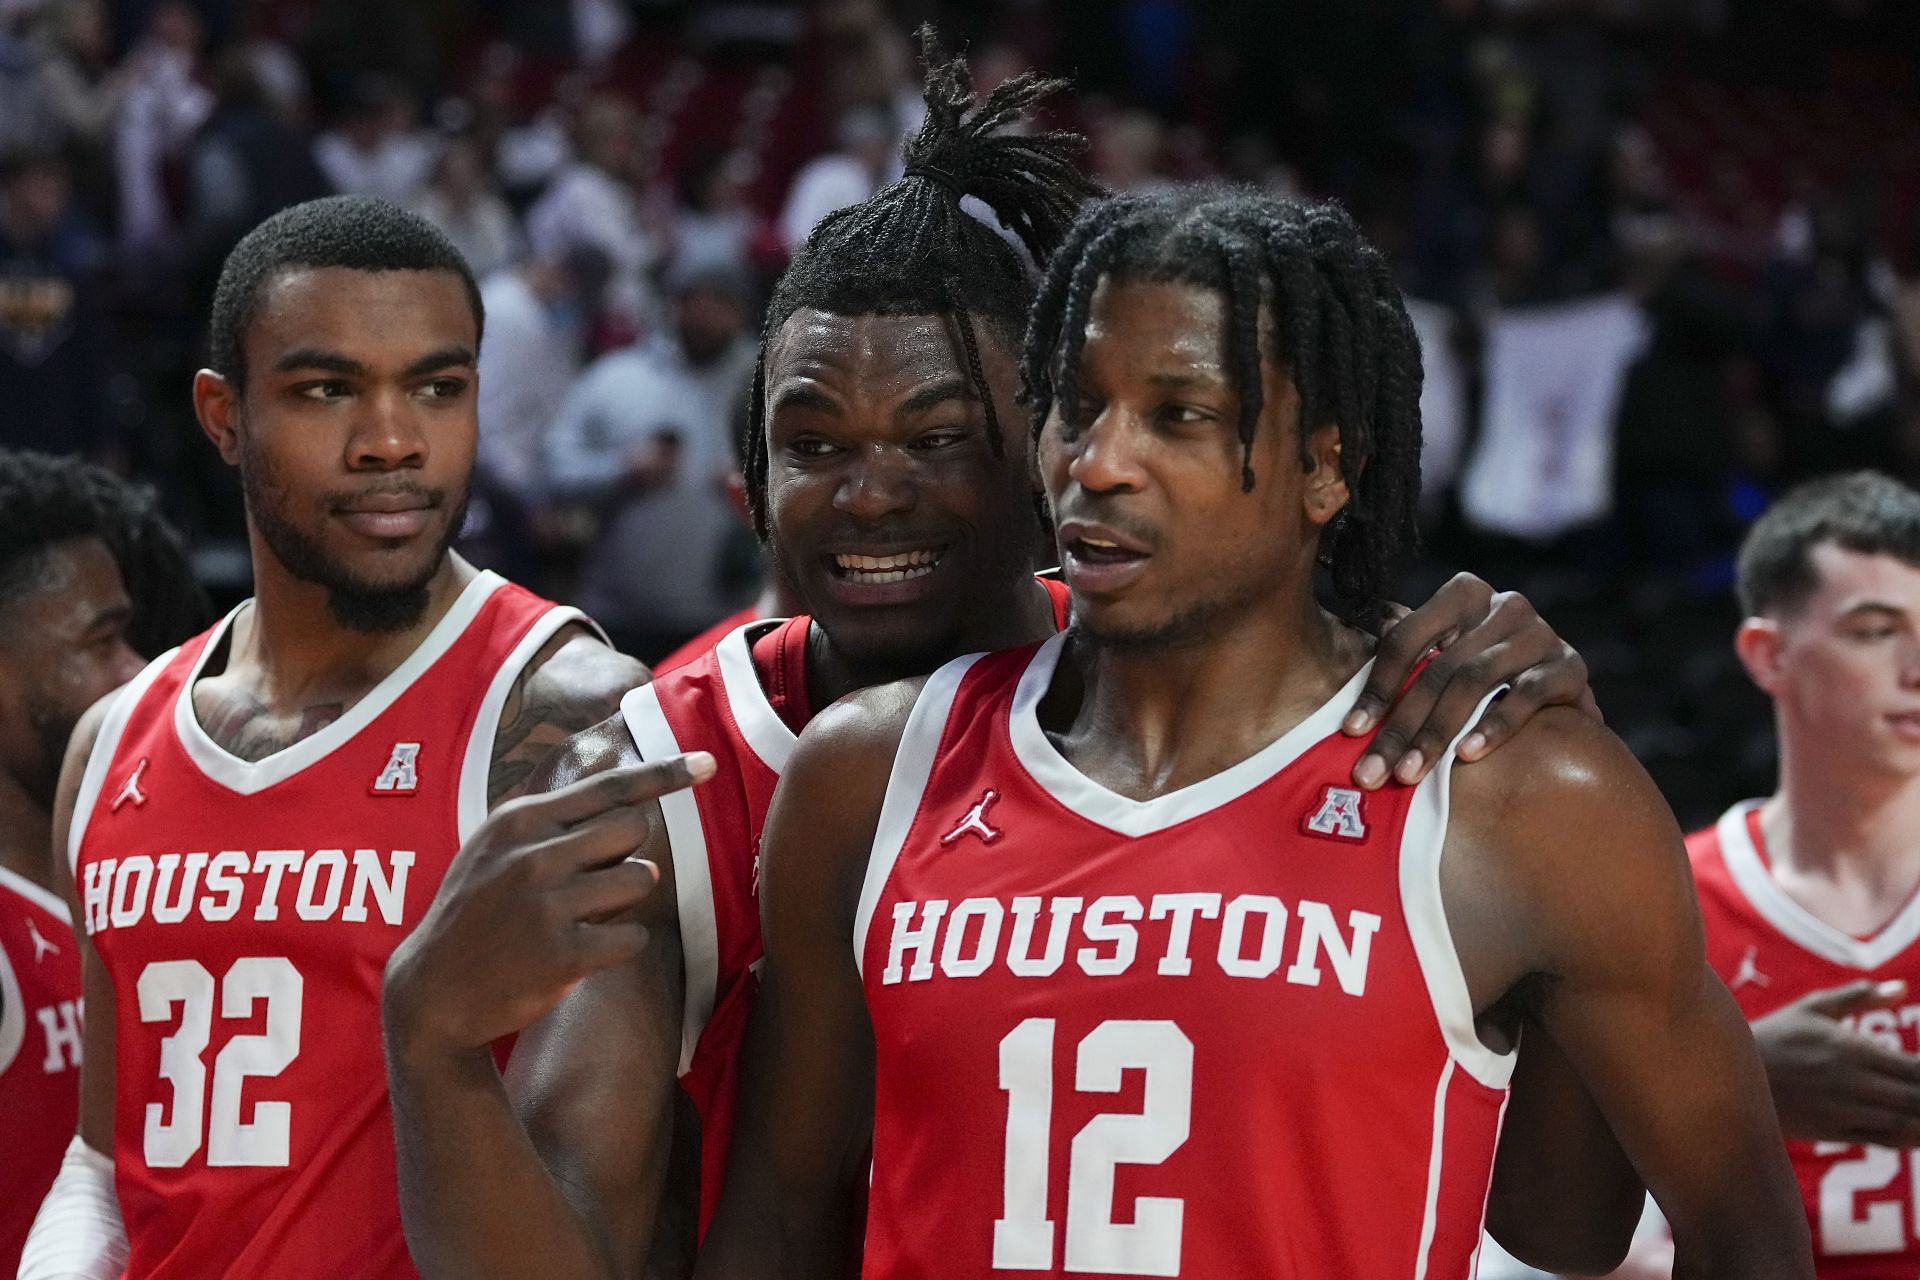 Reggie Chaney, Jarace Walker and Tramon Mark of the Houston Cougars